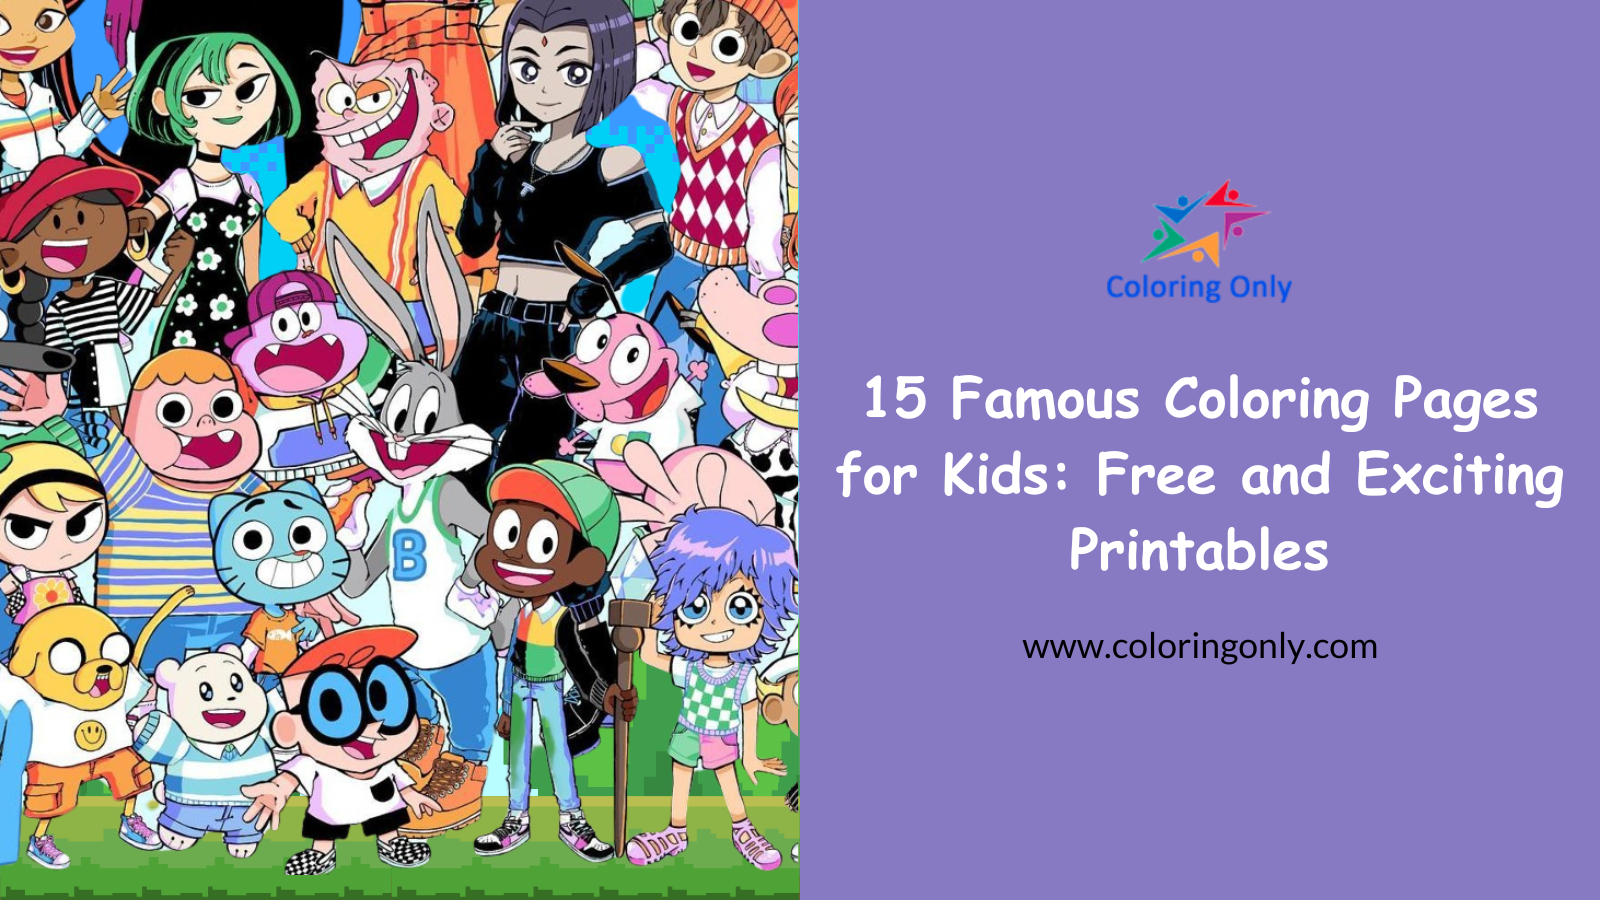 15 Famous Coloring Pages for Kids: Free and Exciting Printables